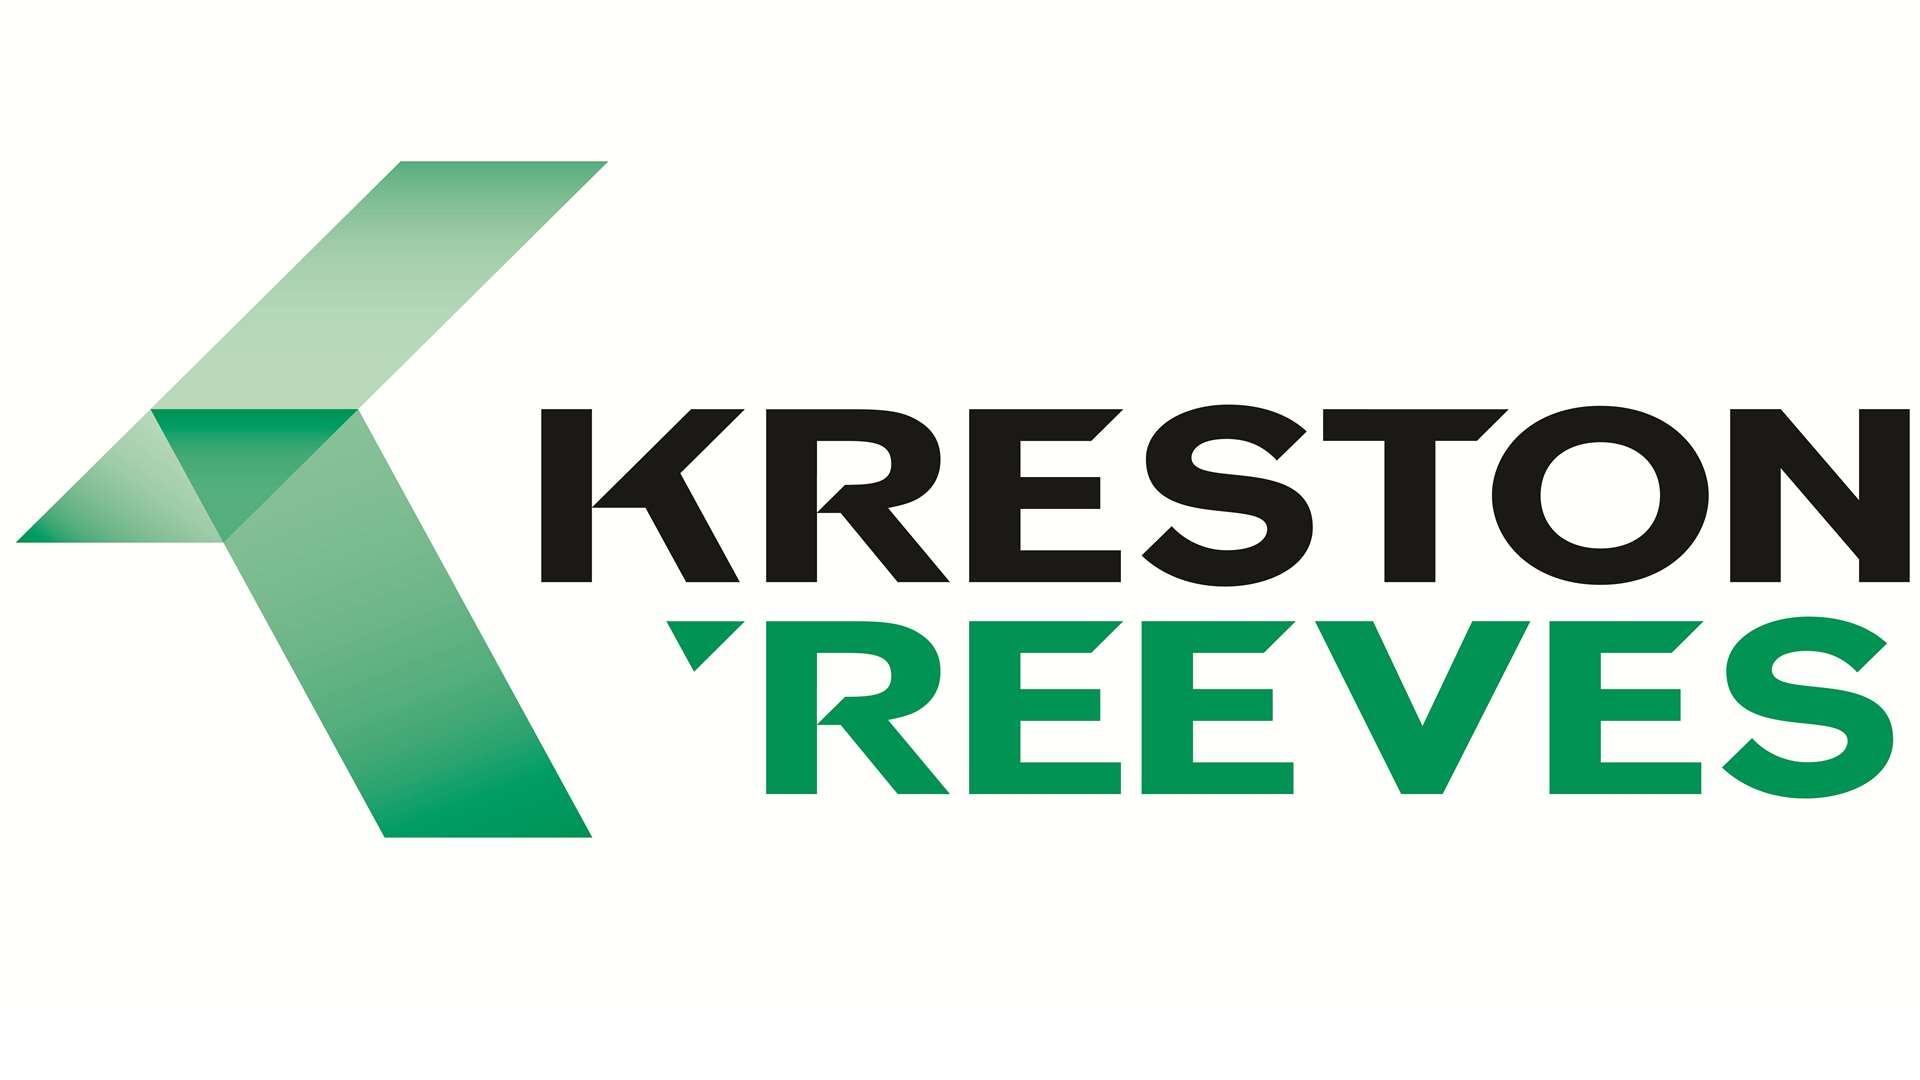 The new business will continue under the Kreston Reeves brand